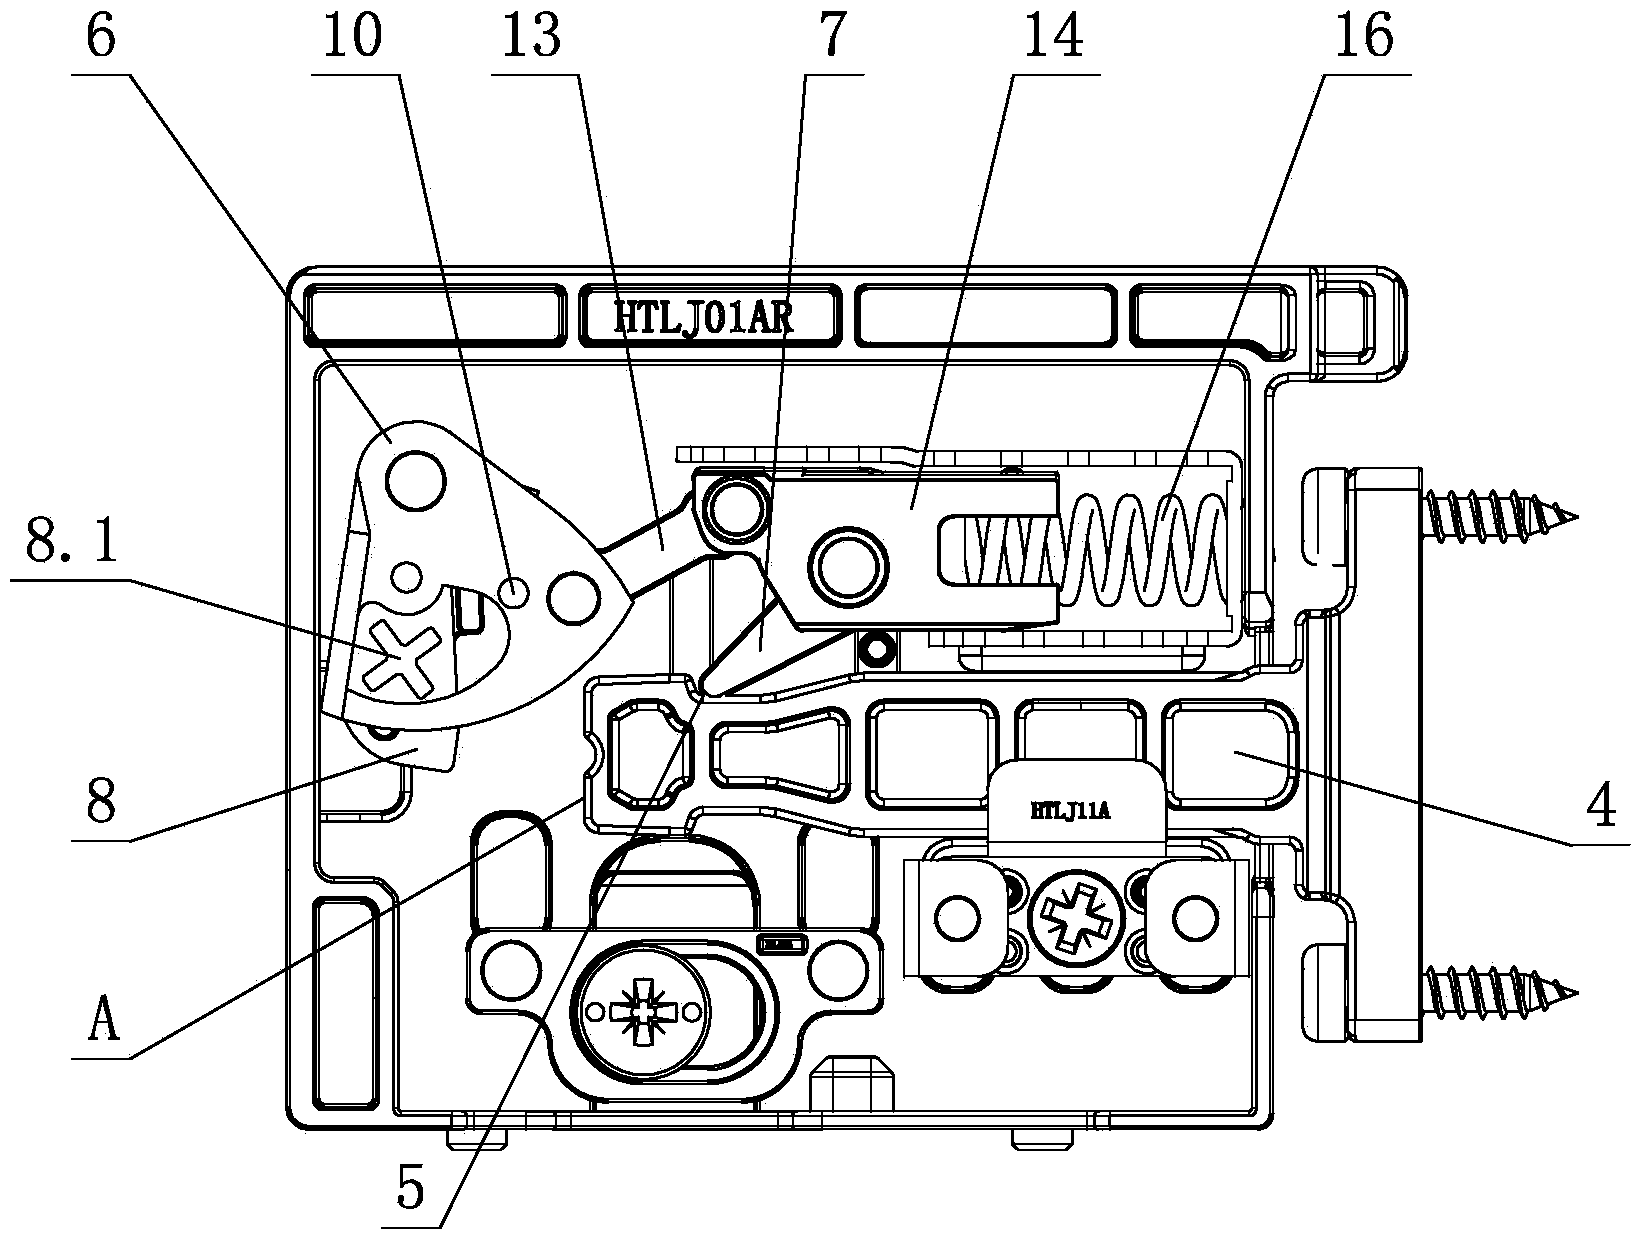 Locking and separating structure for front face plate of drawer